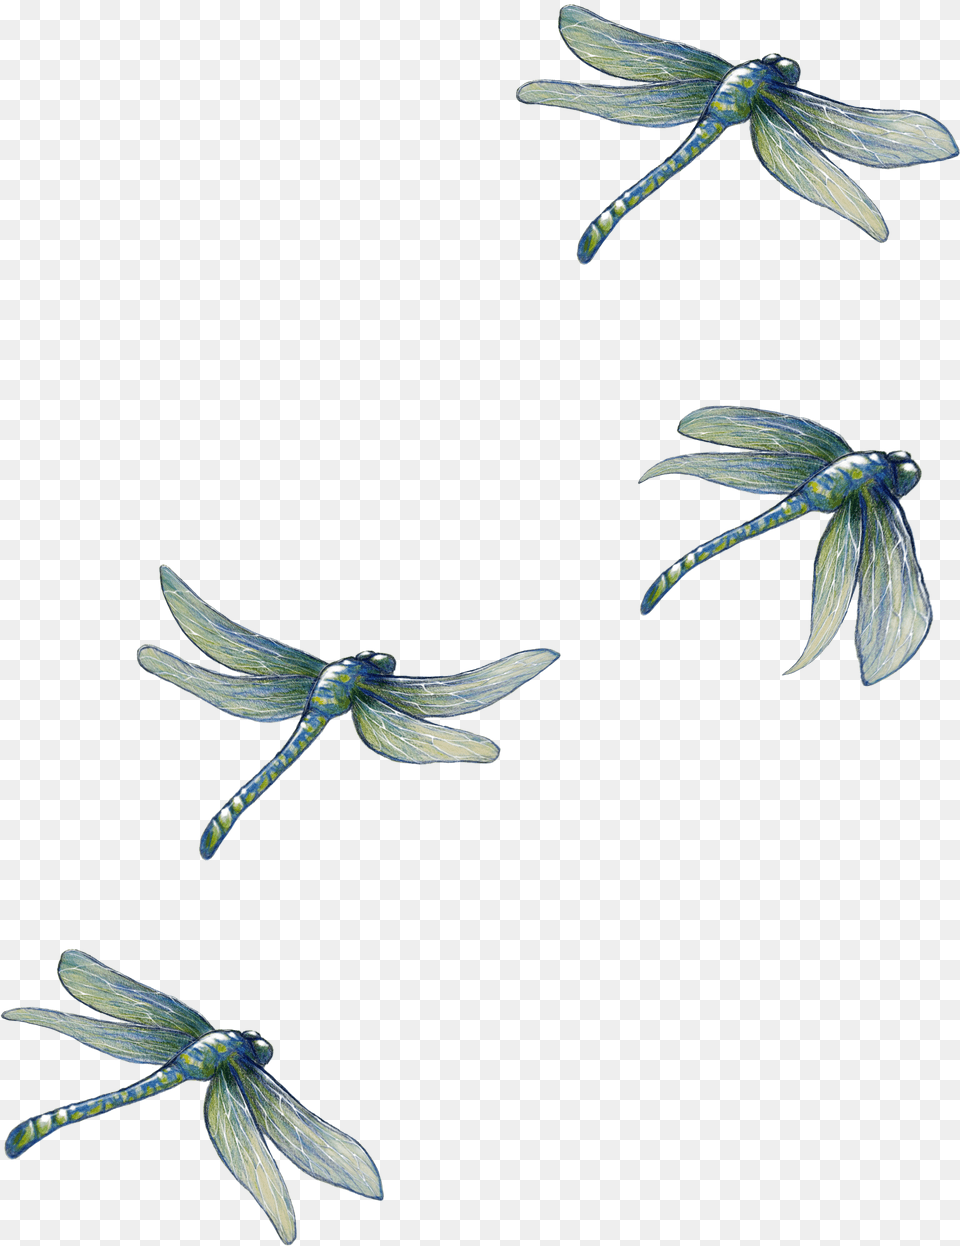 Dragonfly, Animal, Insect, Invertebrate Png Image